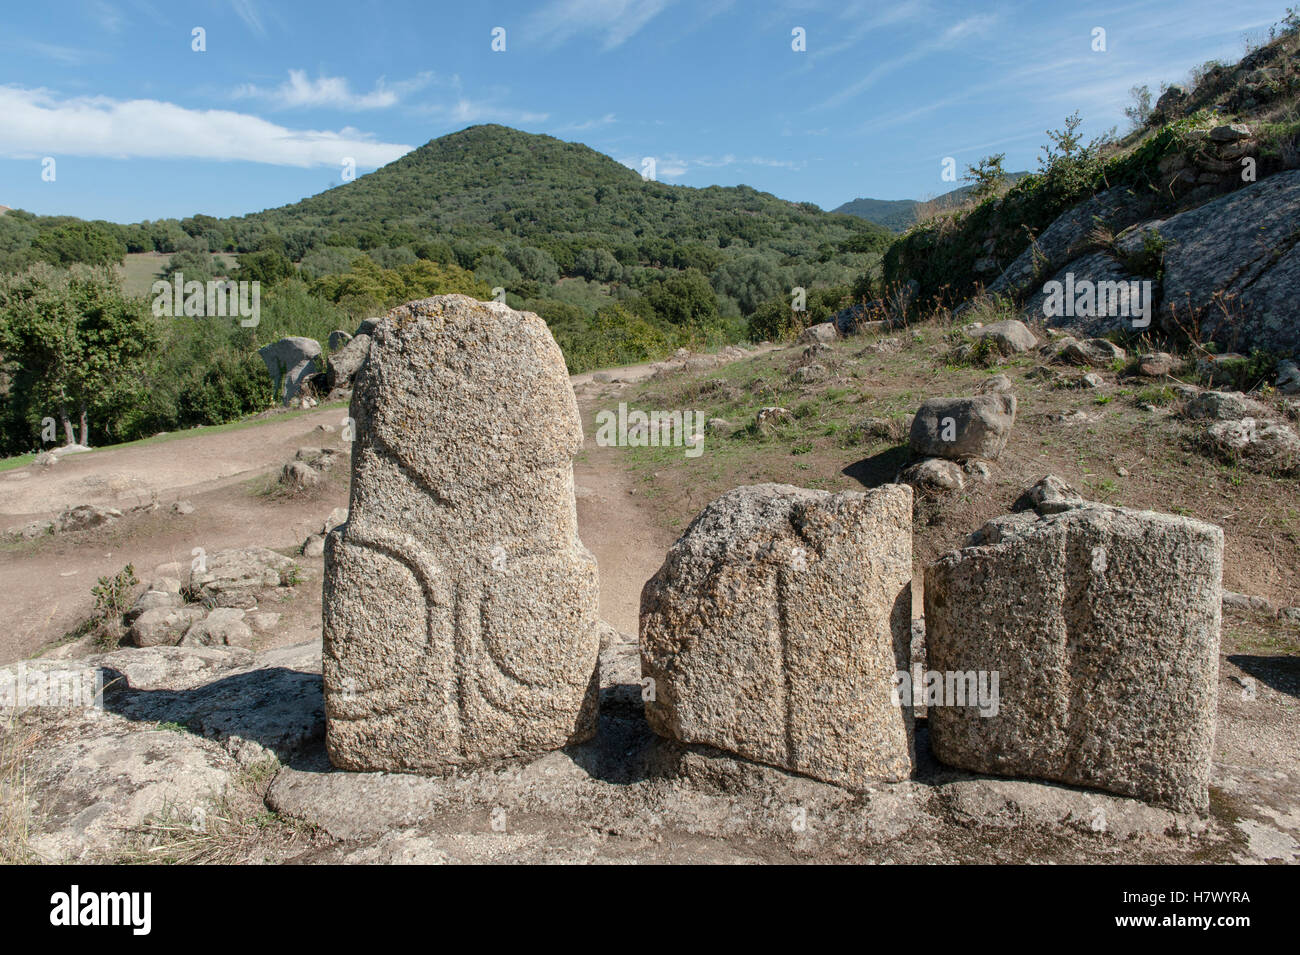 Filotosa, the prehistoric capital of Corsica, features dolmen, menhirs, and Torrean relicts from megalithic times, France Stock Photo